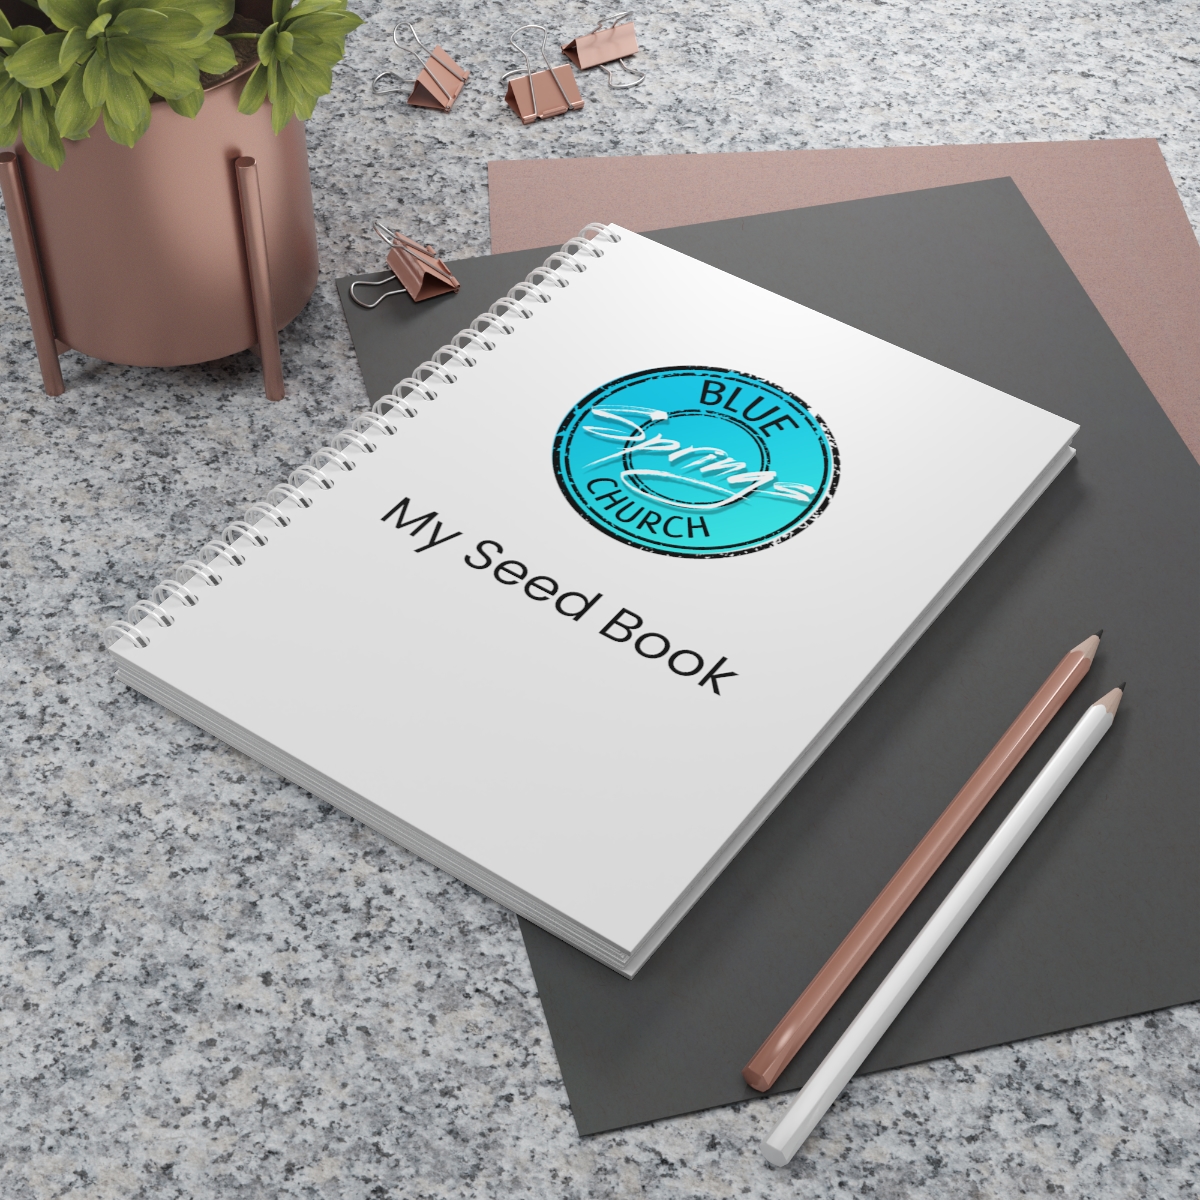 Spiral Notebook product thumbnail image